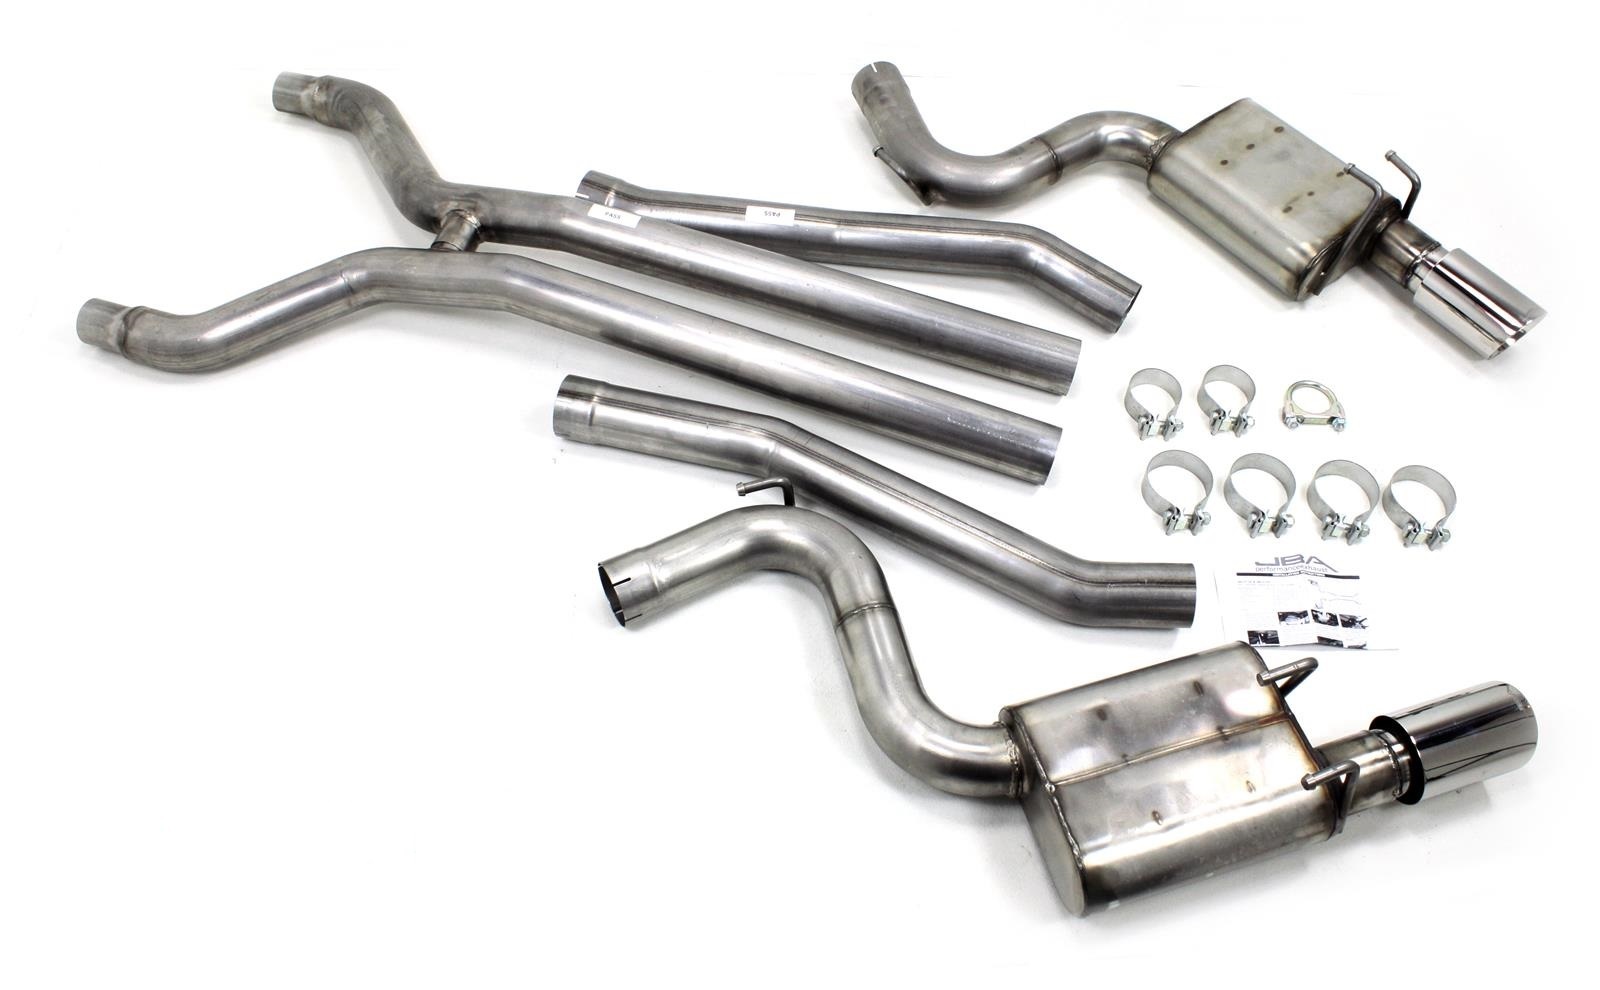 JBA Headers Exhaust System, Cat-Back, 2-1/2" Tailpipe, 4" Tips, Stainless, Natural, GM LS-Series, Chevy Camaro 2015, Kit